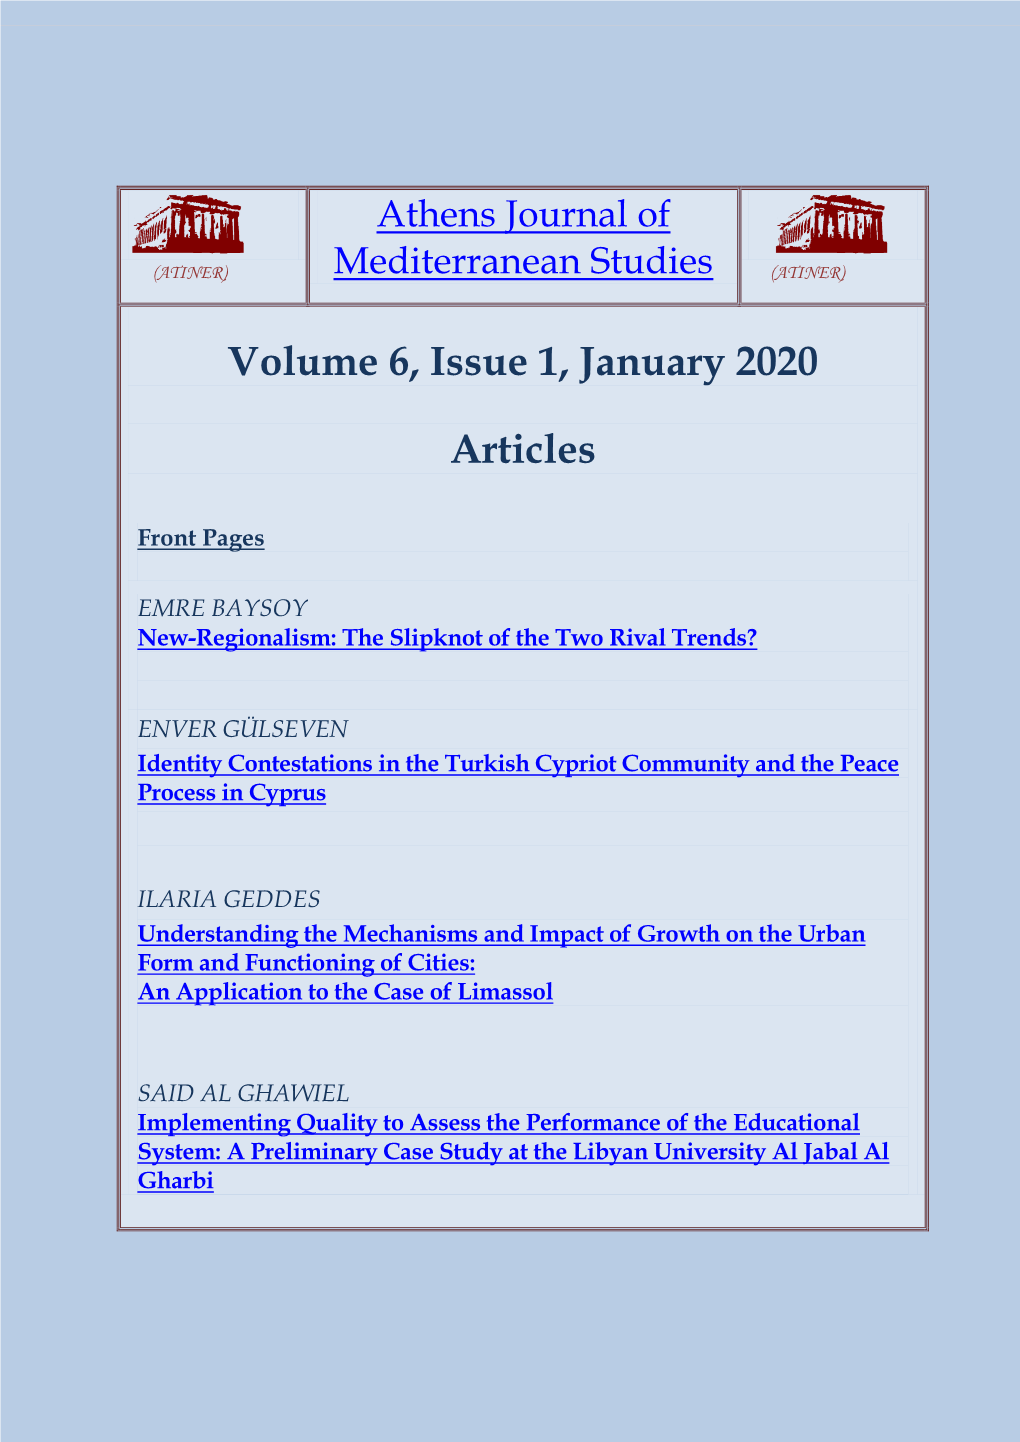 Volume 6, Issue 1, January 2020 Articles